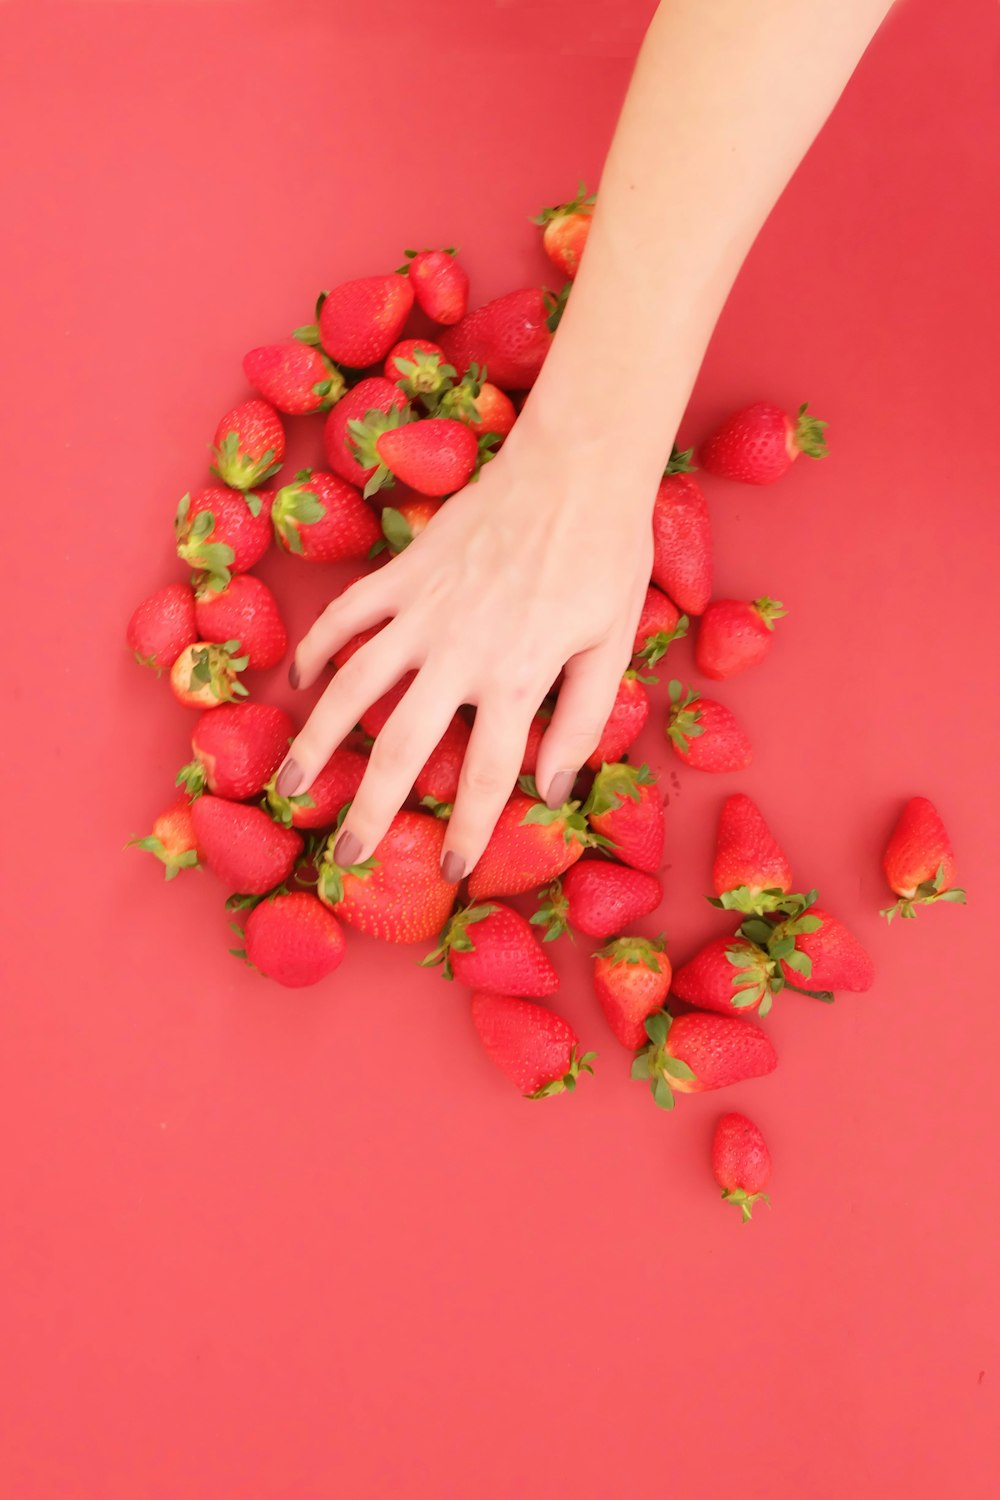 persons hand with red strawberries